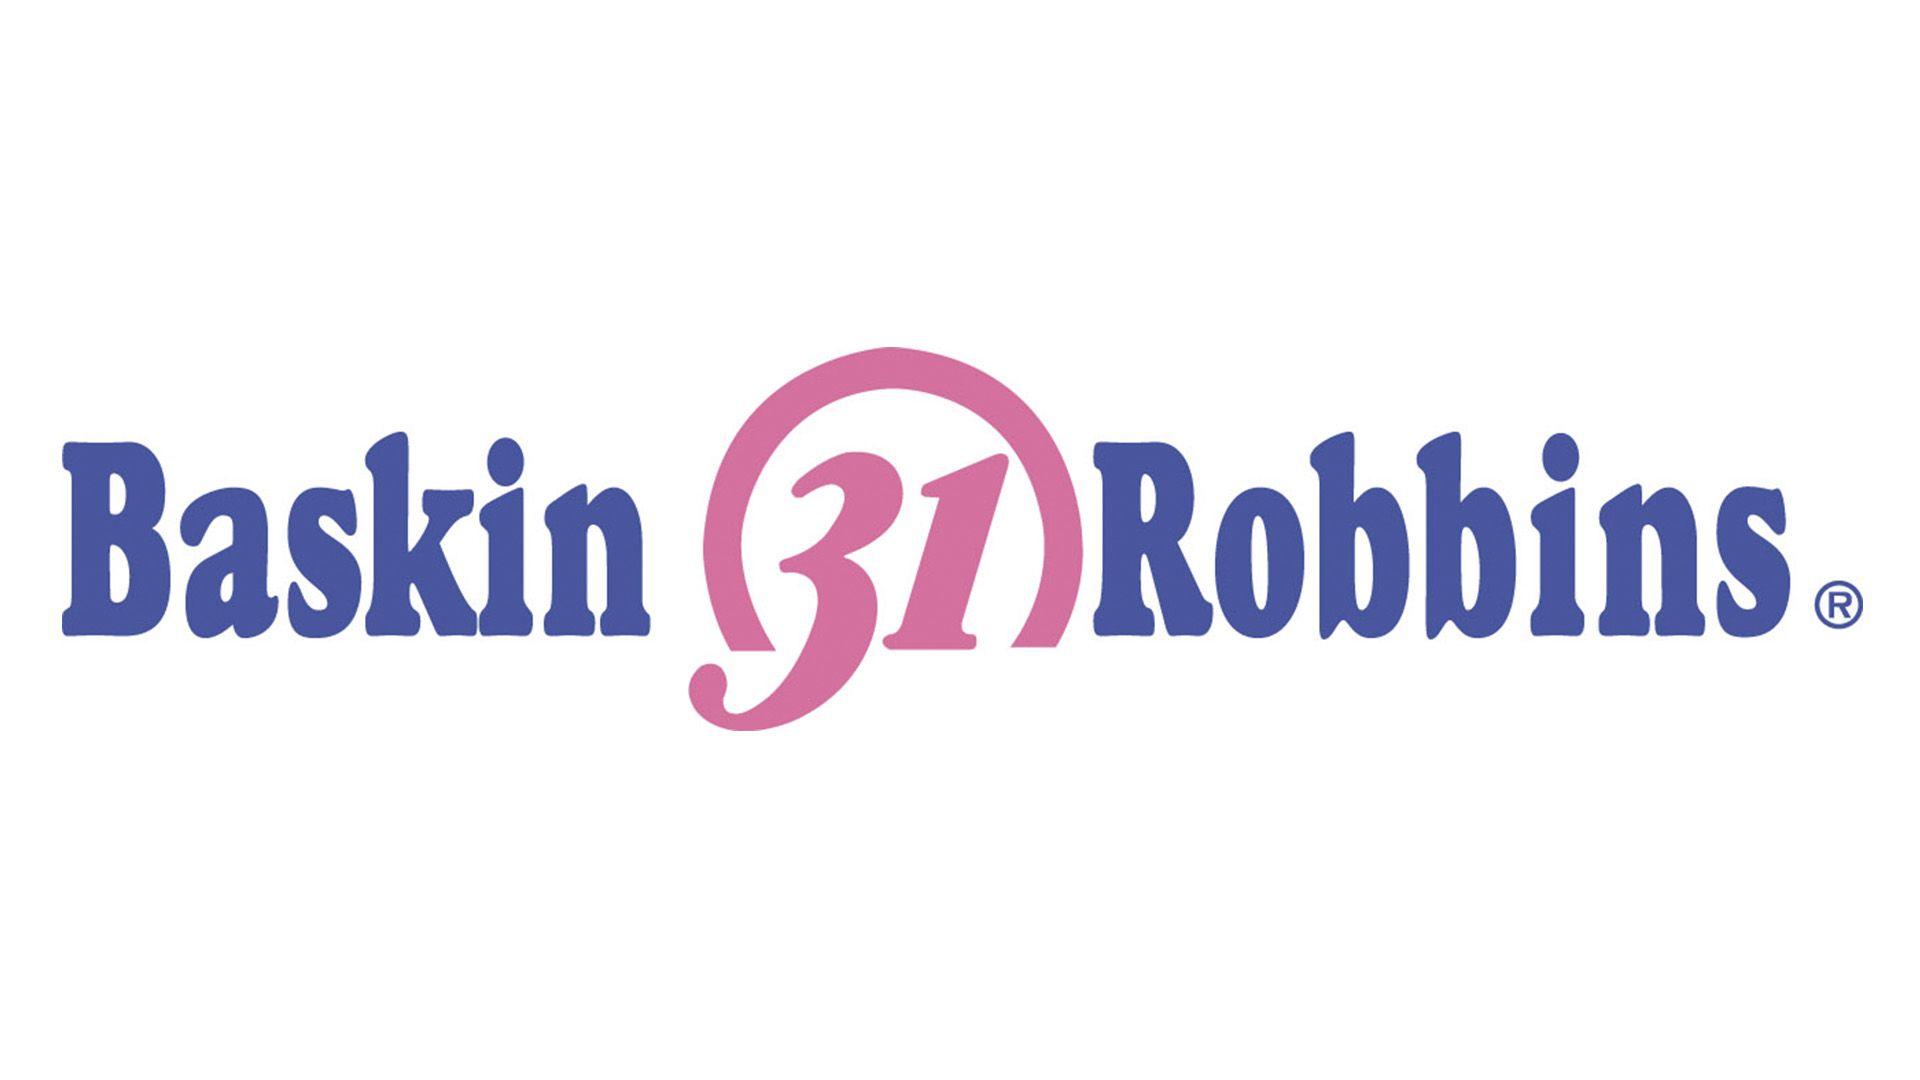 Old Baskin Robbins Logo - Baskin Robbins Logo, Baskin Robbins Symbol Meaning, History